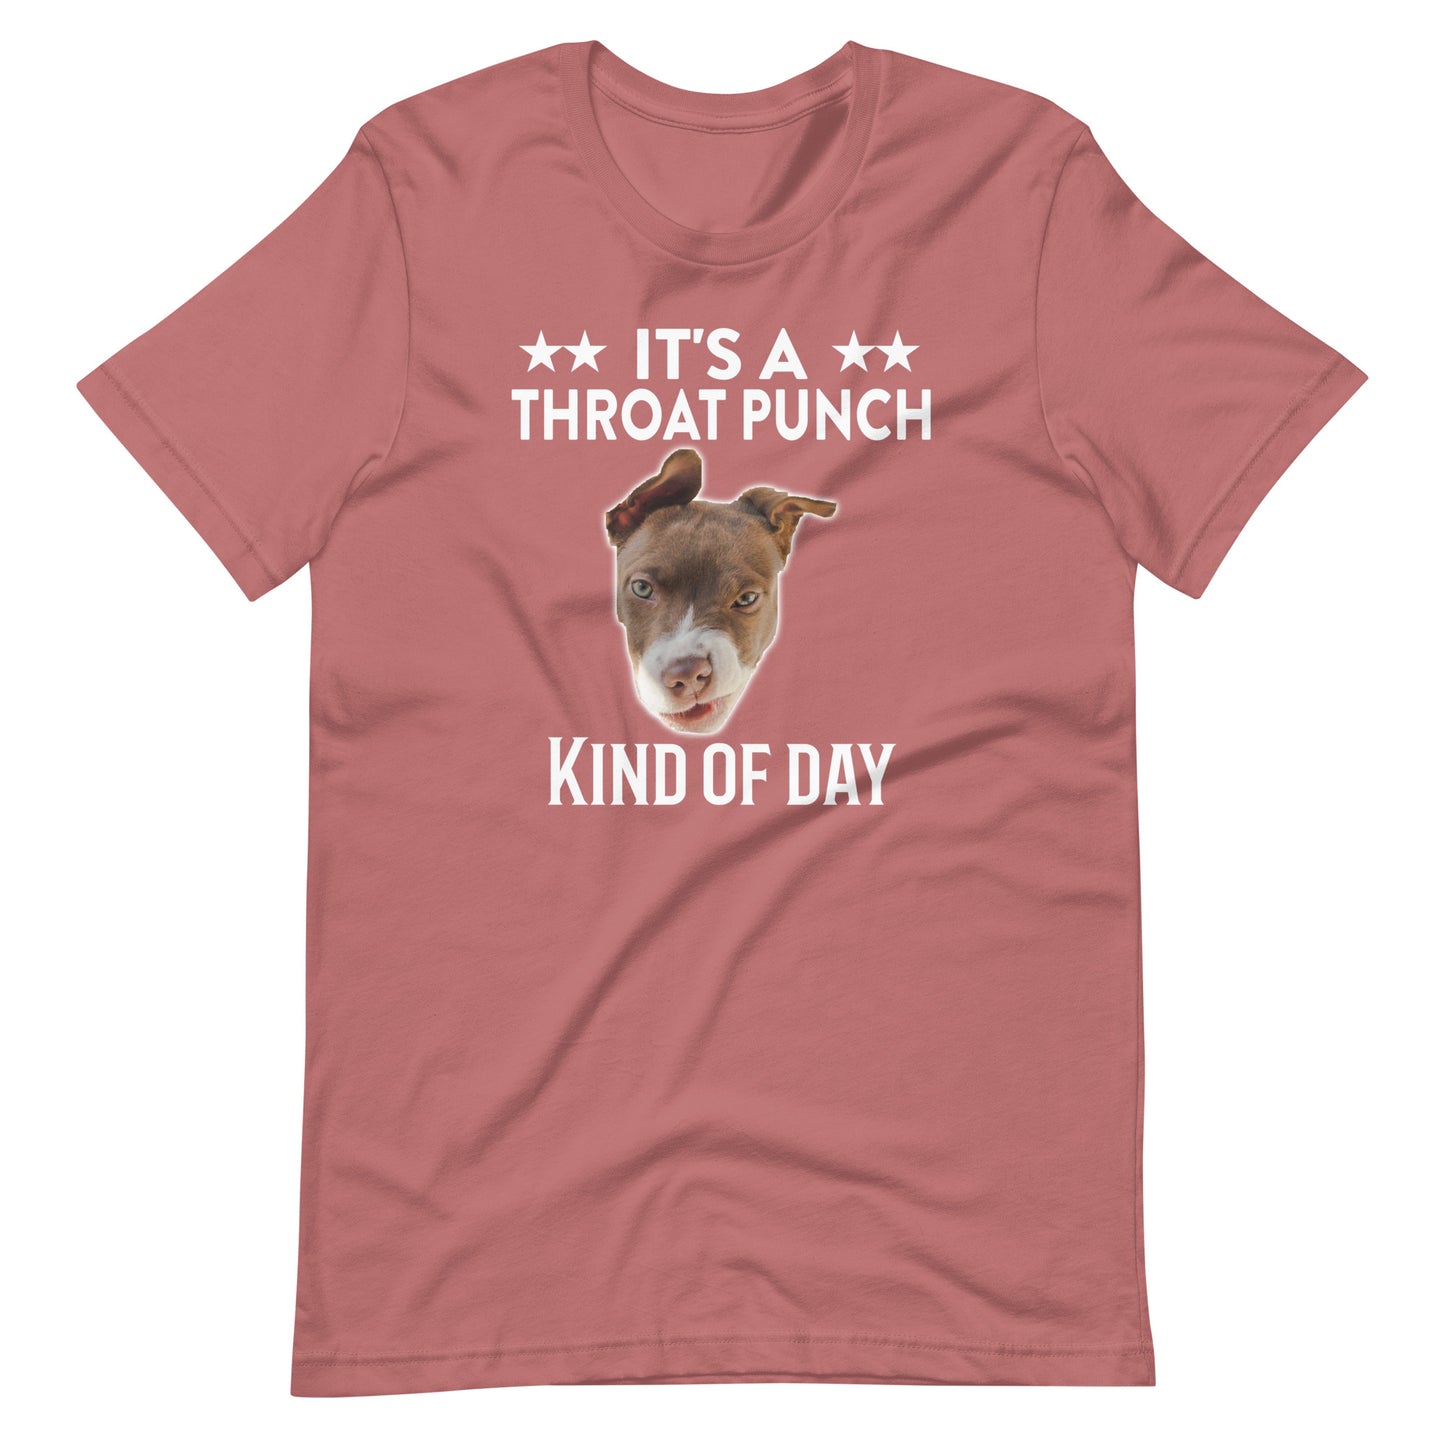 It's A Throat Punch Kind Of Day Unisex T-Shirt for Dog Lovers